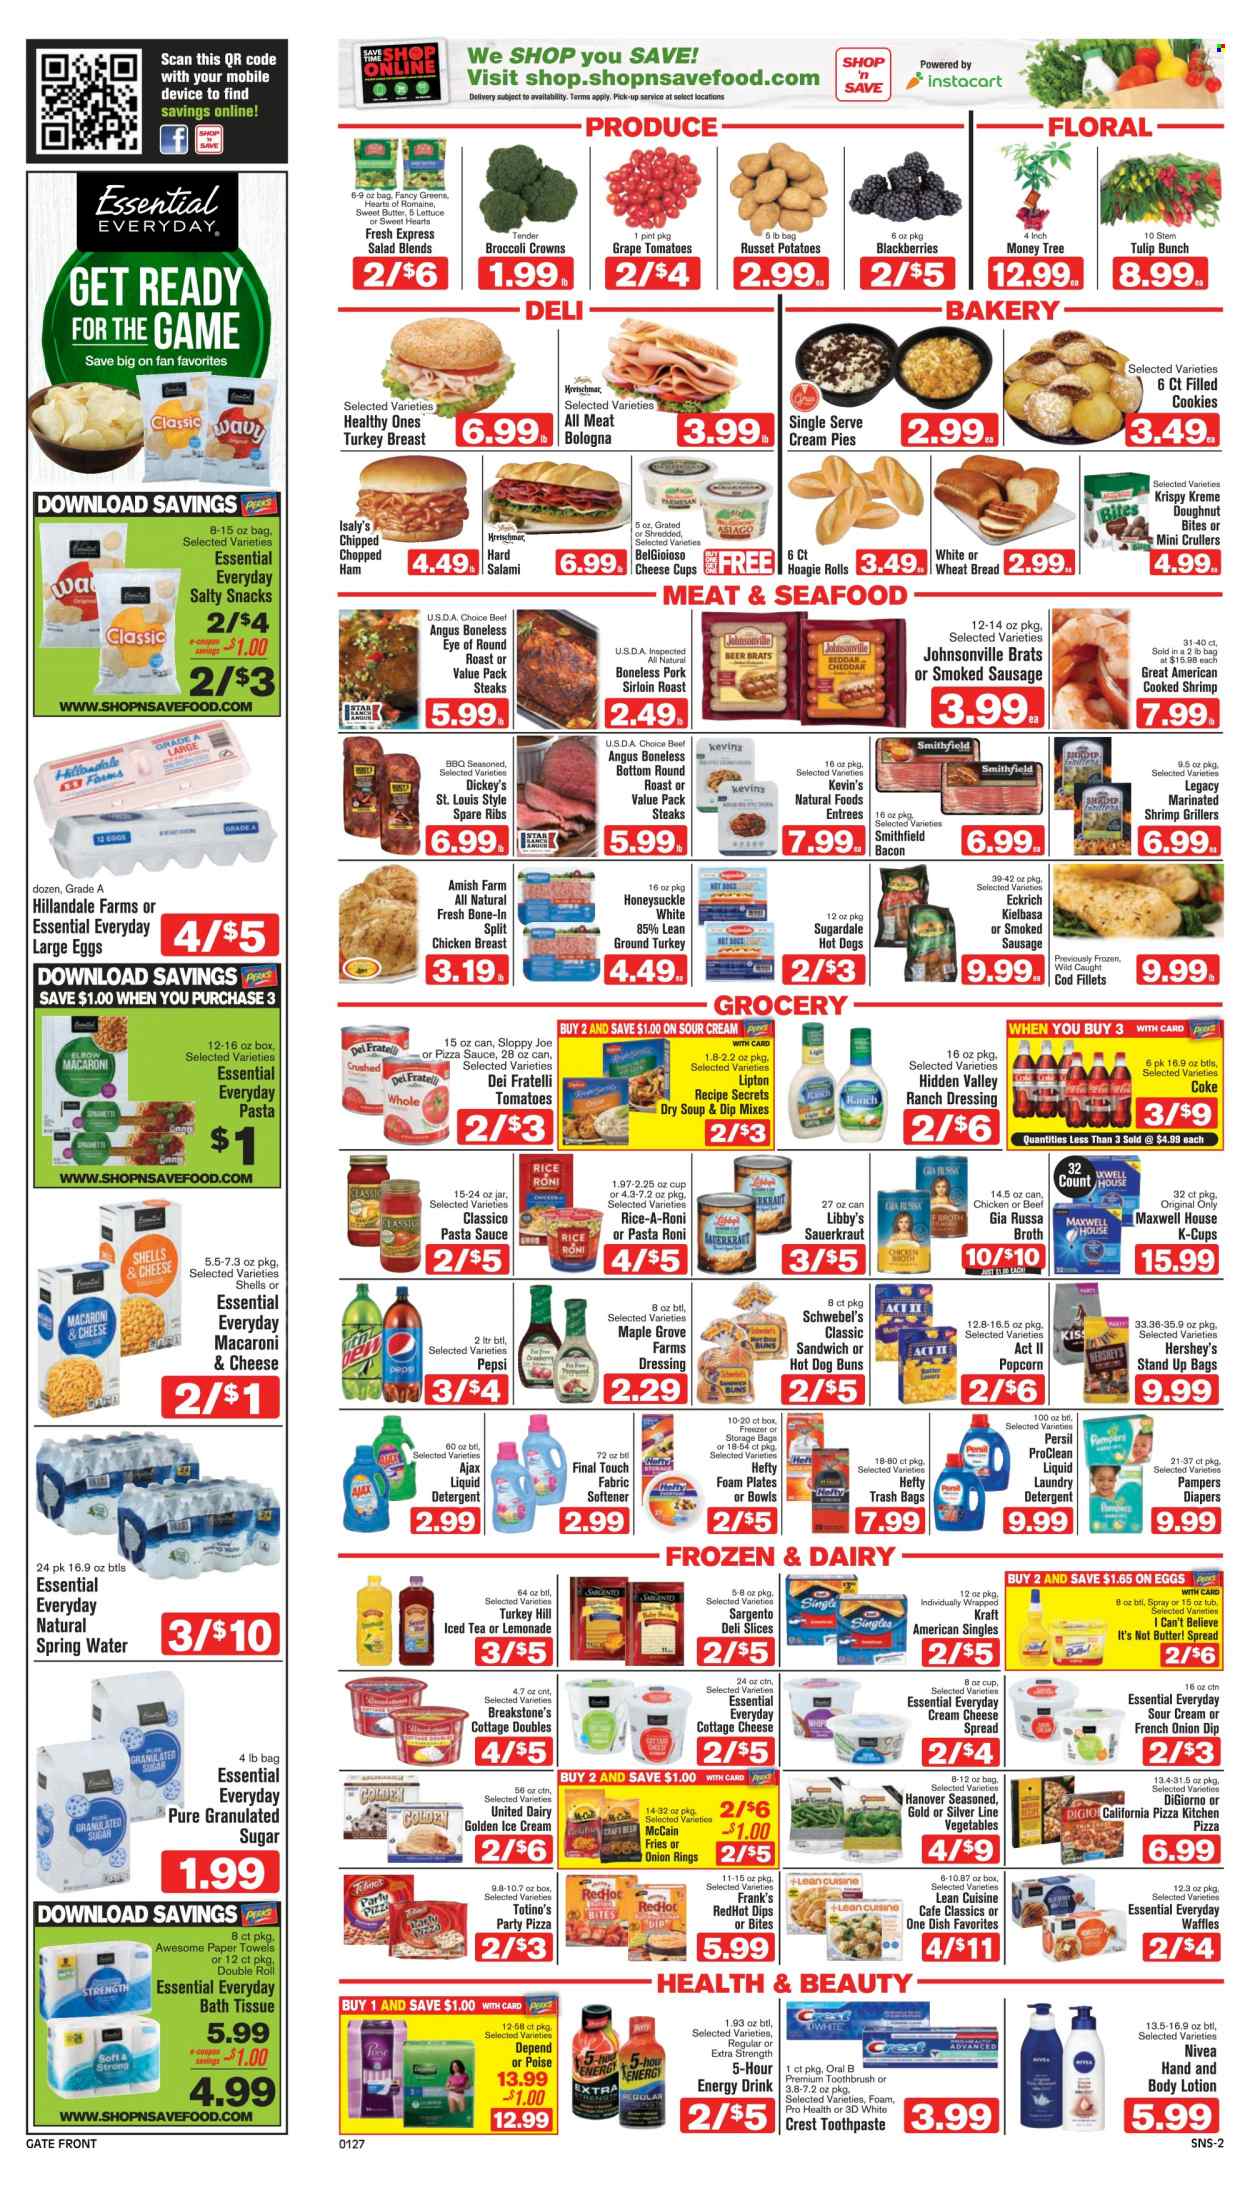 thumbnail - Shop ‘n Save Flyer - 01/27/2022 - 02/02/2022 - Sales products - wheat bread, buns, donut, cream pie, waffles, russet potatoes, potatoes, blackberries, ground turkey, chicken breasts, beef meat, steak, eye of round, round roast, Johnsonville, pork loin, pork spare ribs, cod, seafood, shrimps, macaroni & cheese, spaghetti, pasta sauce, onion rings, sandwich, soup, Lean Cuisine, Kraft®, Sugardale, salami, ham, sausage, smoked sausage, kielbasa, cheese spread, asiago, cottage cheese, cream cheese, cheese cup, parmesan, Kraft Singles, Sargento, large eggs, I Can't Believe It's Not Butter, sour cream, ranch dressing, ice cream, Hershey's, McCain, potato fries, cookies, snack, popcorn, granulated sugar, sugar, chicken broth, broth, sauerkraut, rice, dressing, Classico, Coca-Cola, lemonade, Pepsi, energy drink, Lipton, ice tea, spring water, Maxwell House, coffee capsules, K-Cups, beer, bath tissue, kitchen towels, paper towels, detergent, Ajax, Persil, fabric softener, liquid detergent, laundry detergent, toothbrush, Oral-B, toothpaste, Crest, Nivea, body lotion. Page 2.